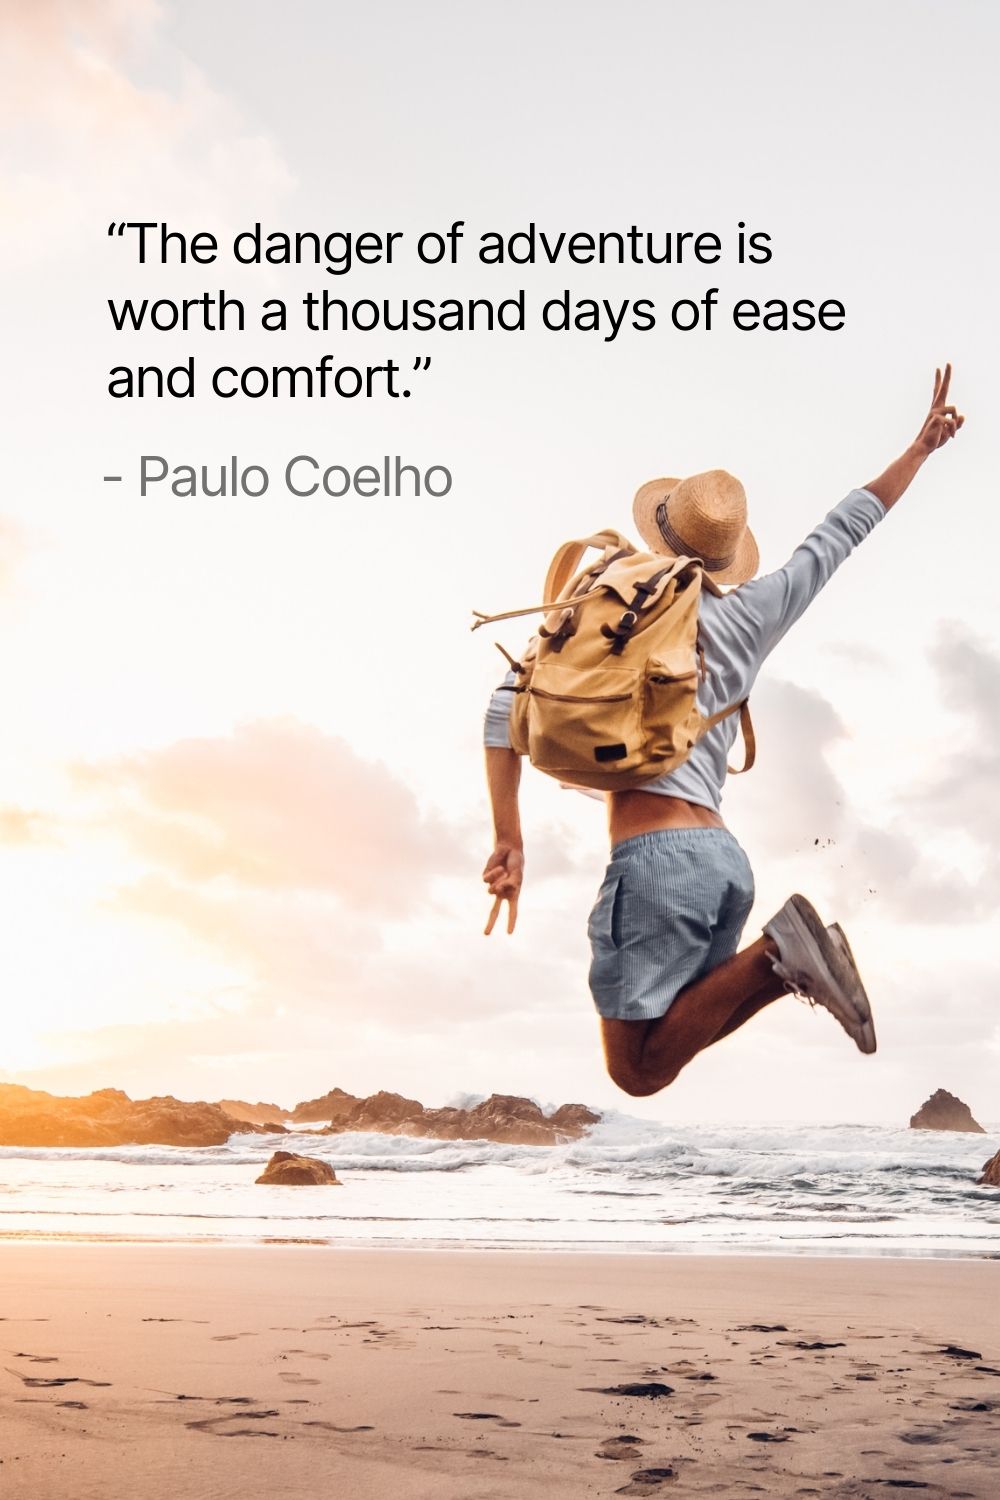 “The danger of adventure is worth a thousand days of ease and comfort.” - Paulo Coelho